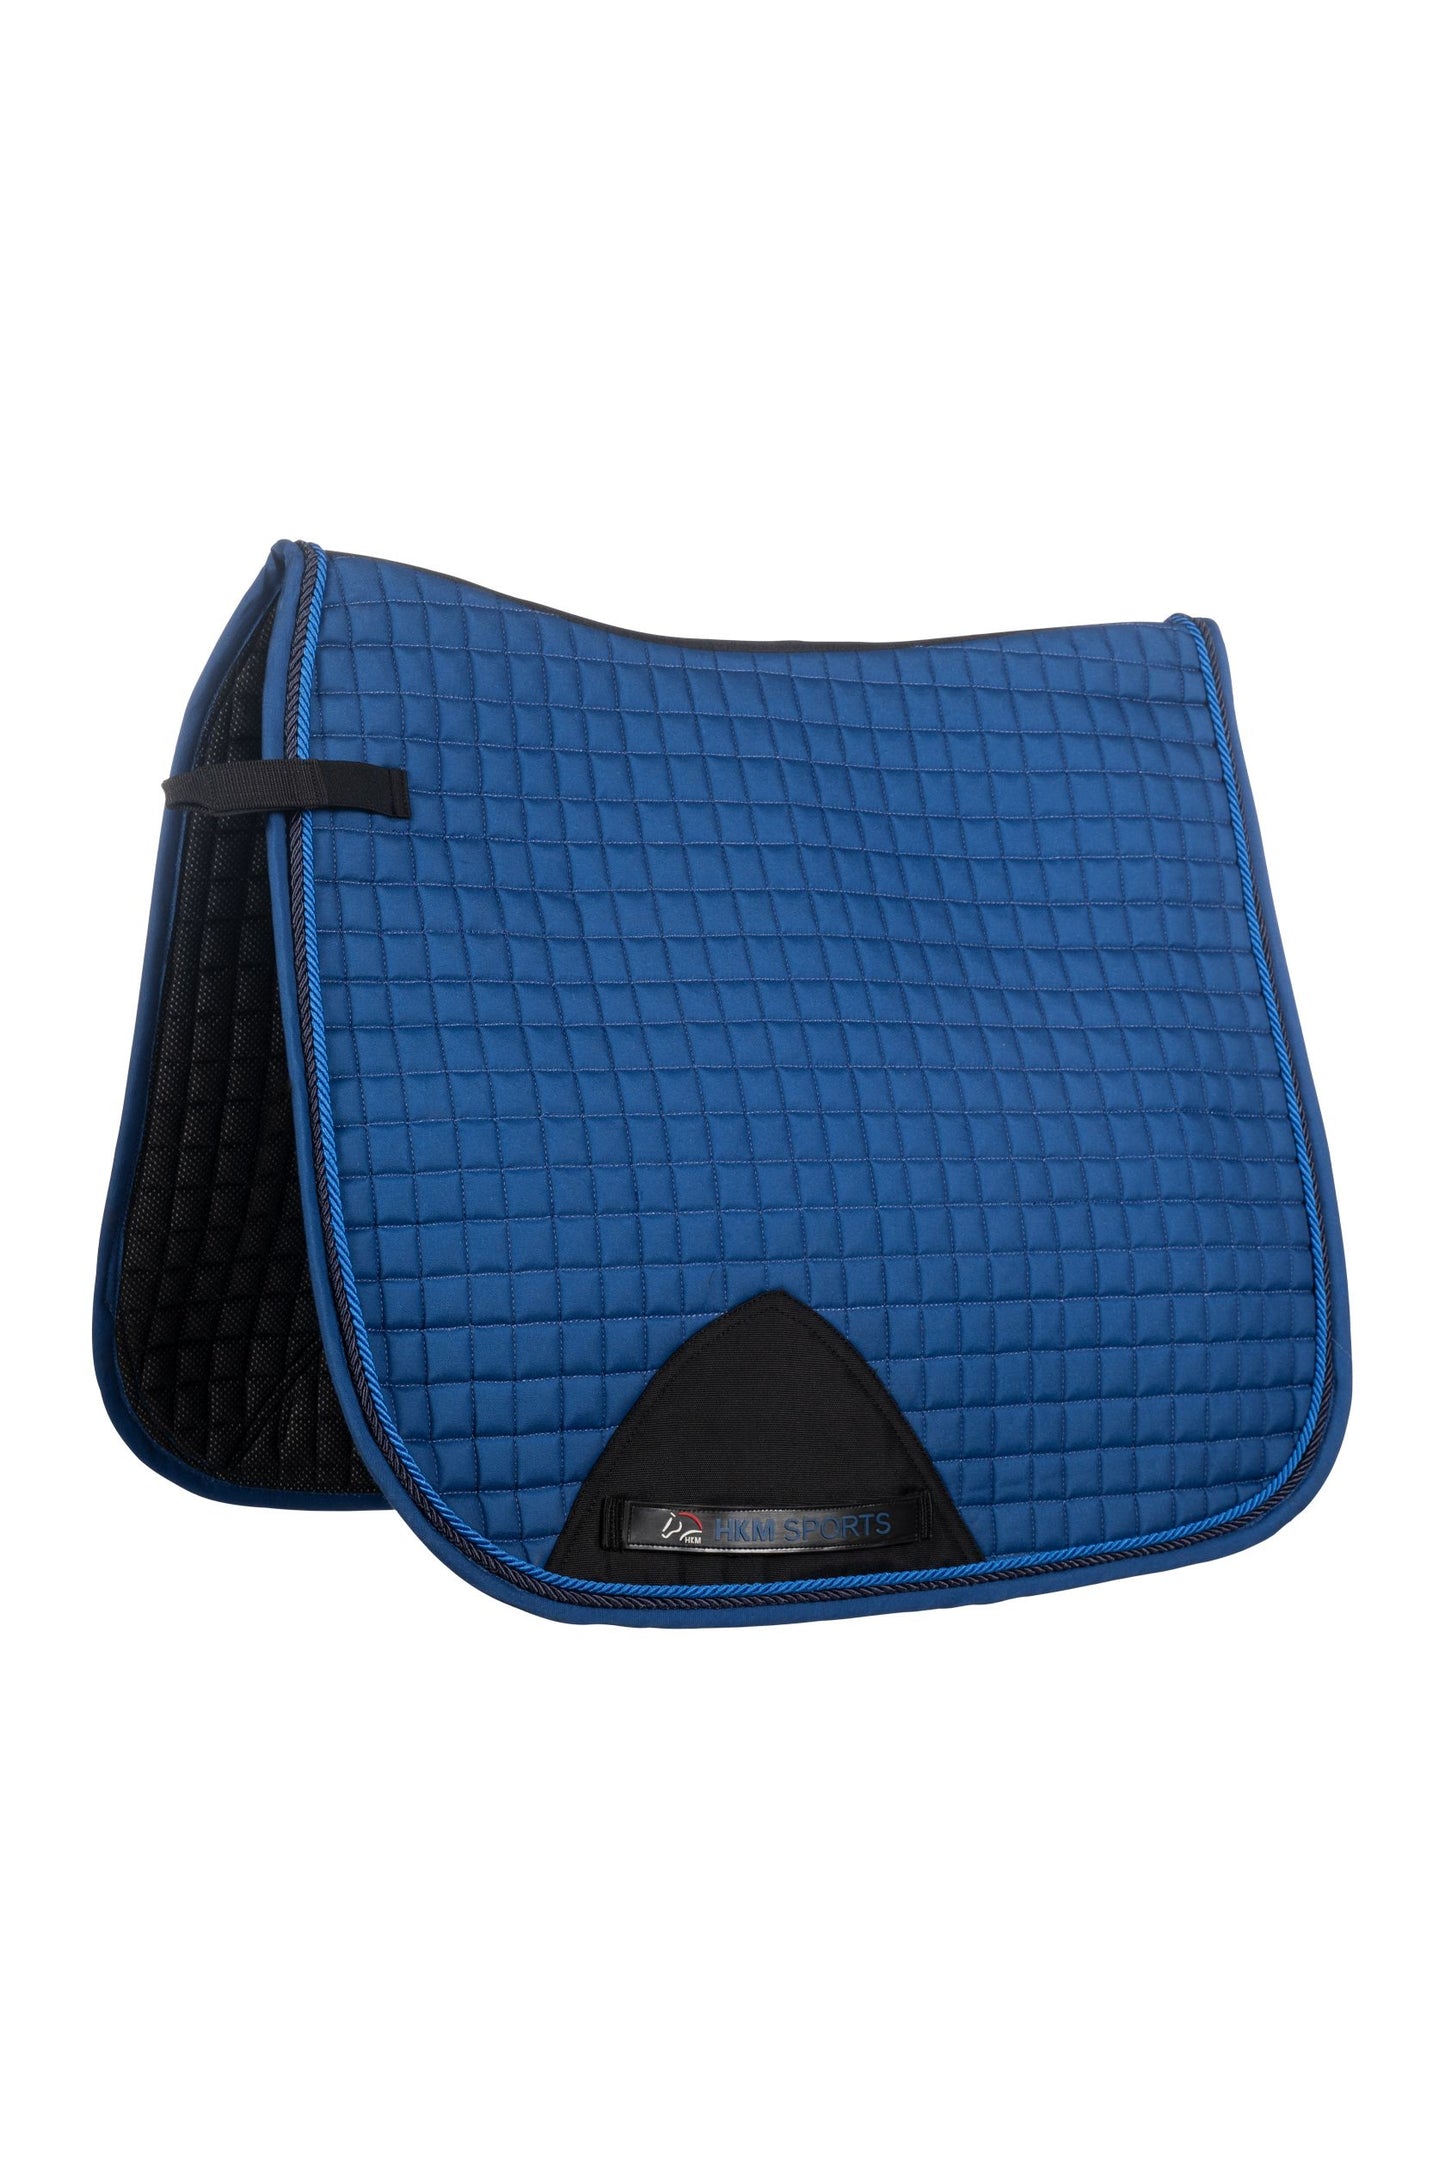 HKM The Essential Saddle Pad - Royal Blue - Dressage and Jump